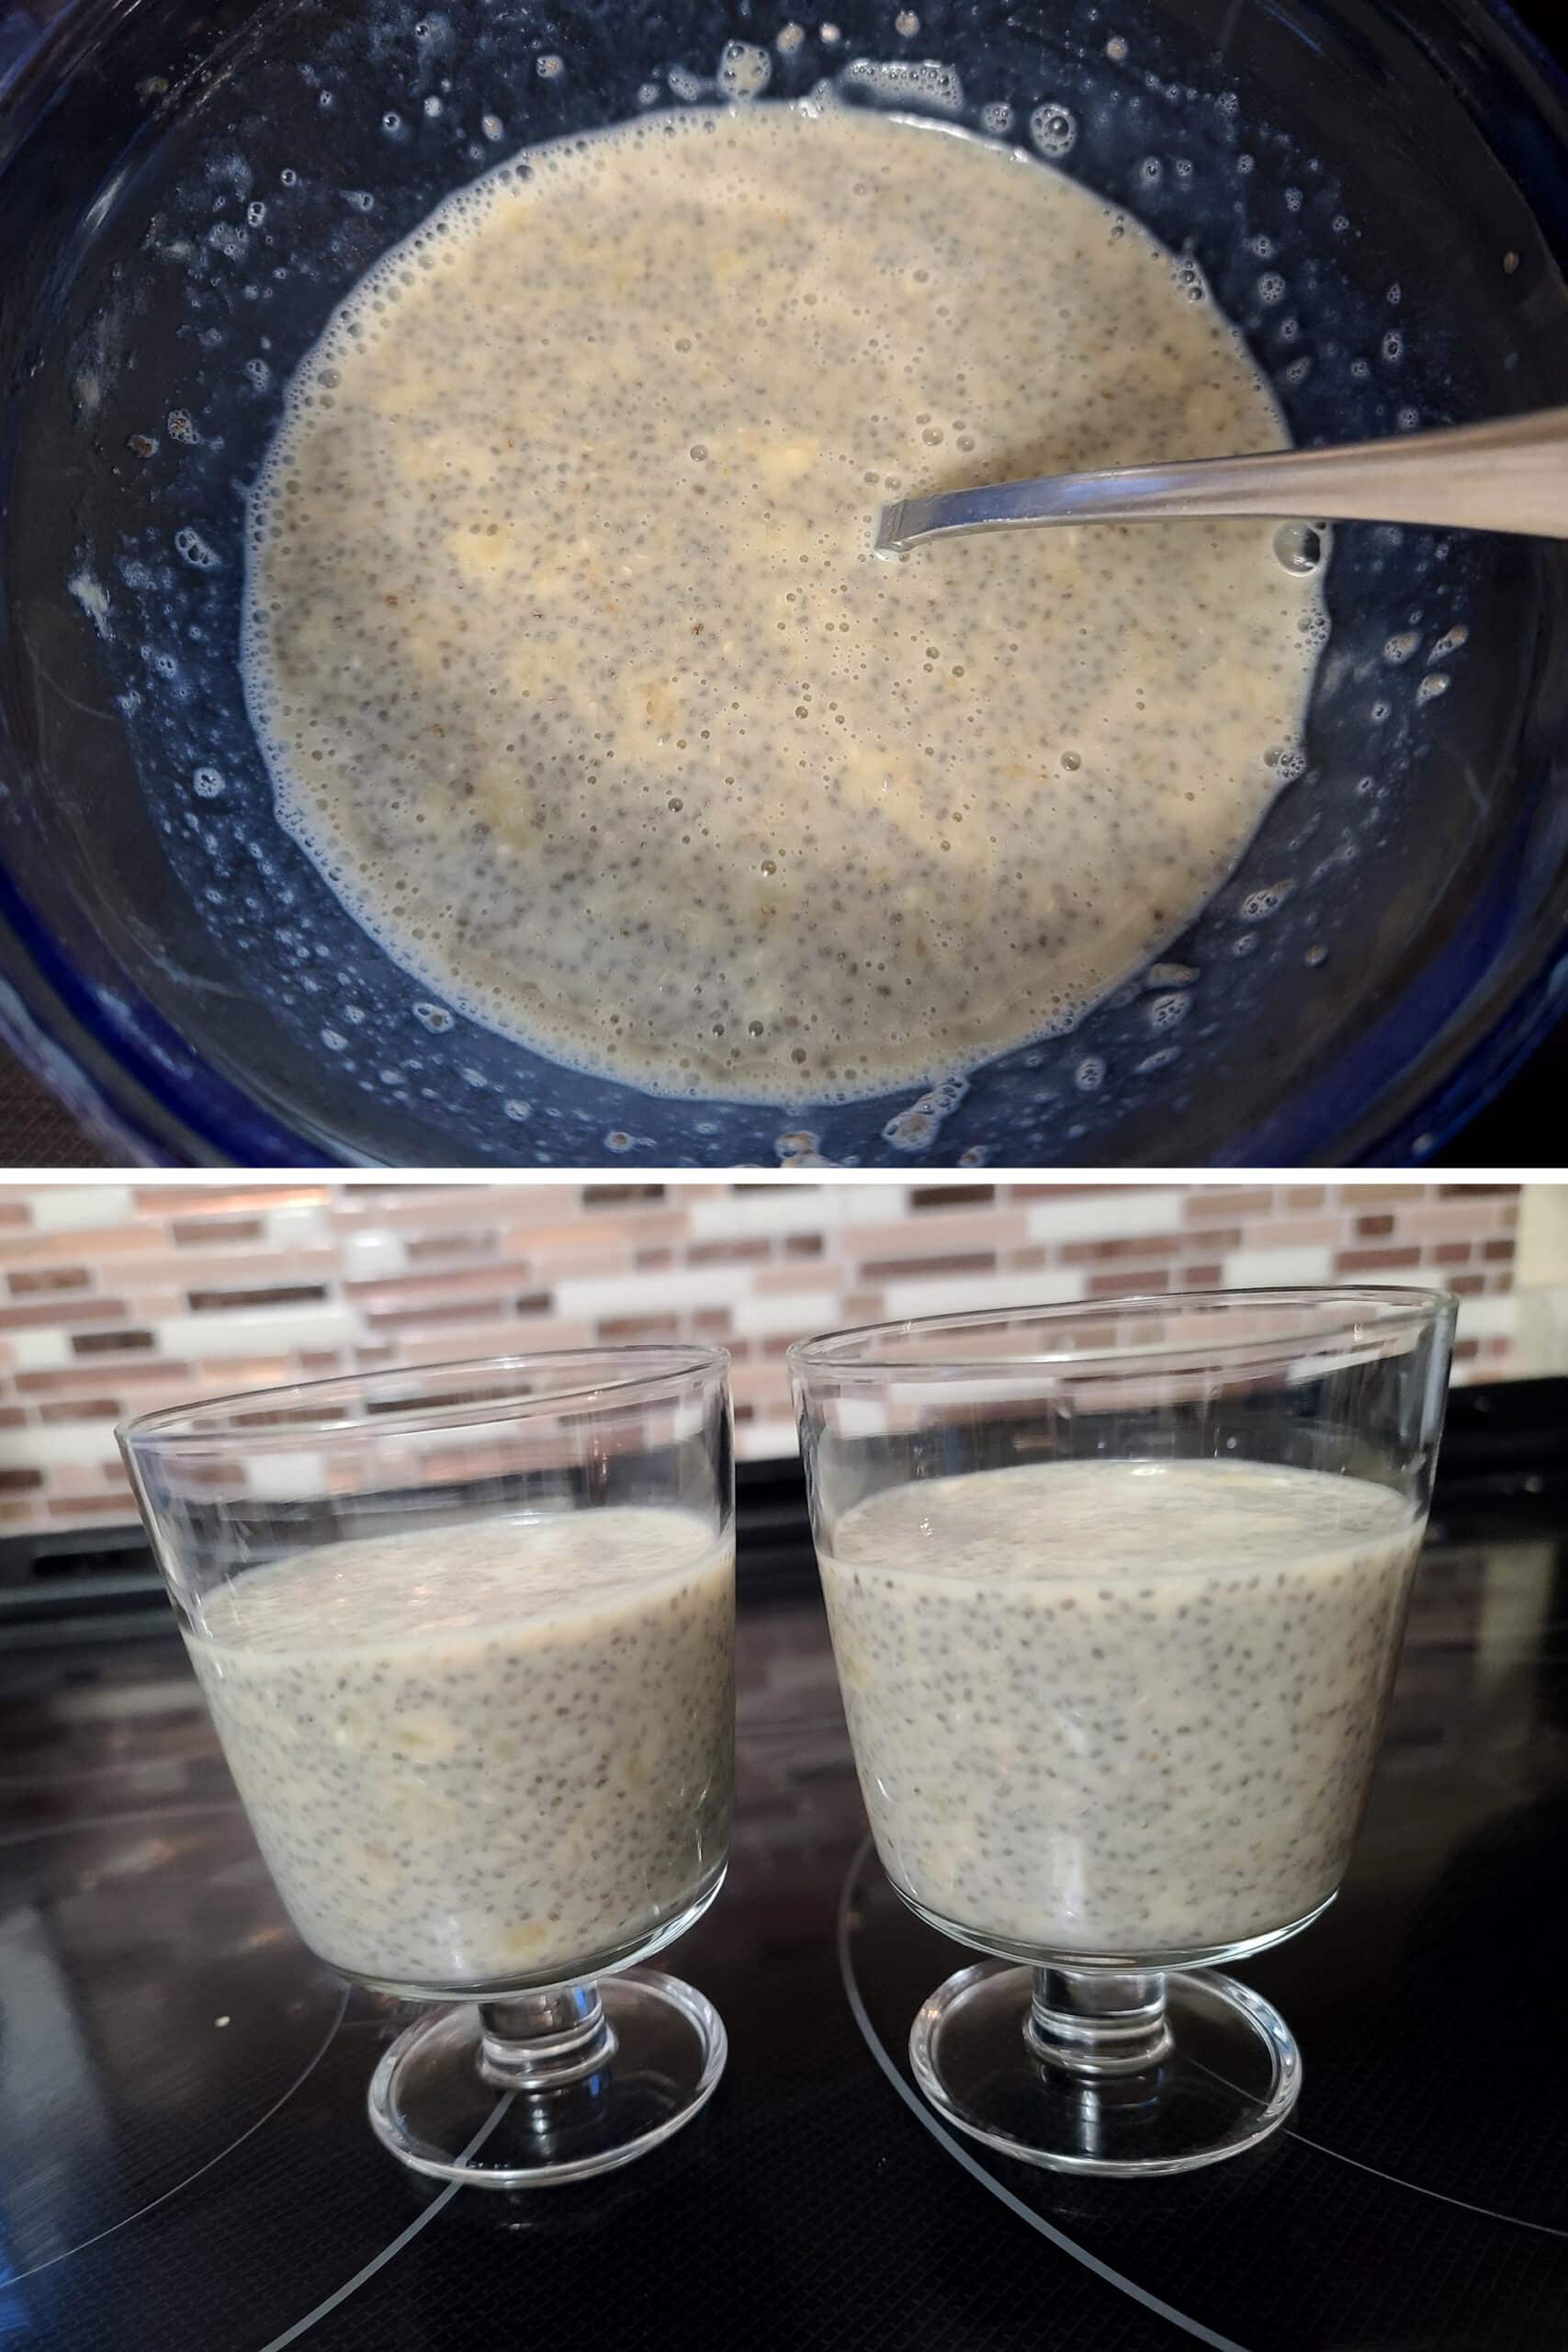 A 2 part image showing a bowl of thickened banana chia pudding, then the pudding in 2 stemmed serving glasses.